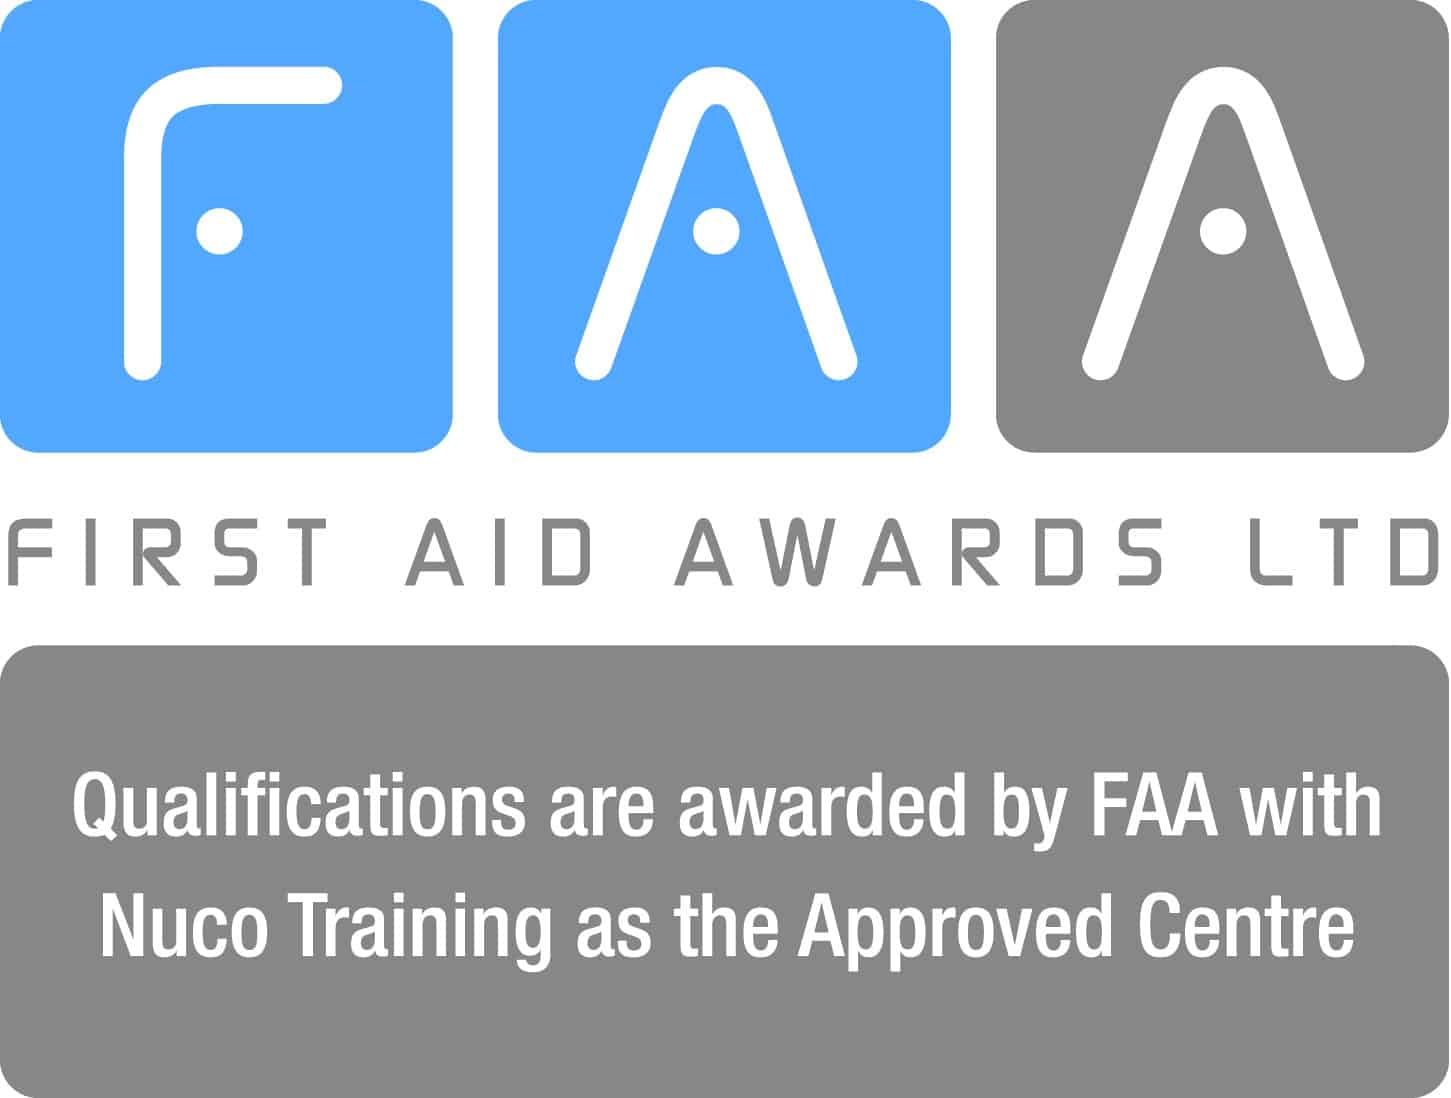 Mental Health First Aid Courses approved by First Aid Awards